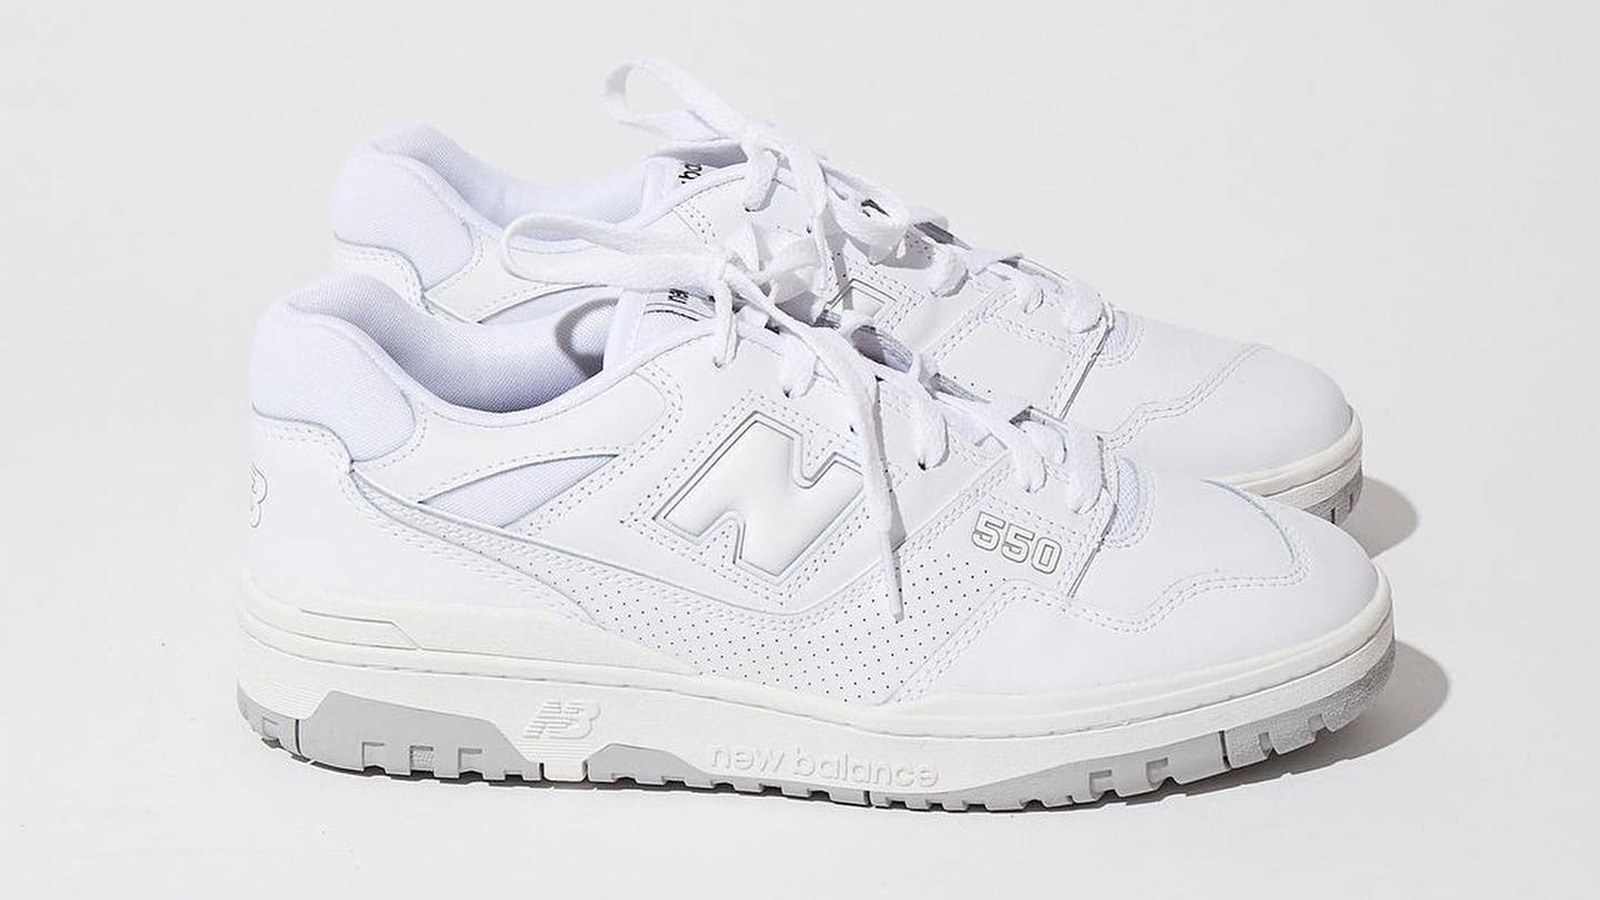 A Closer Look At The New Balance 550 “White/Grey”